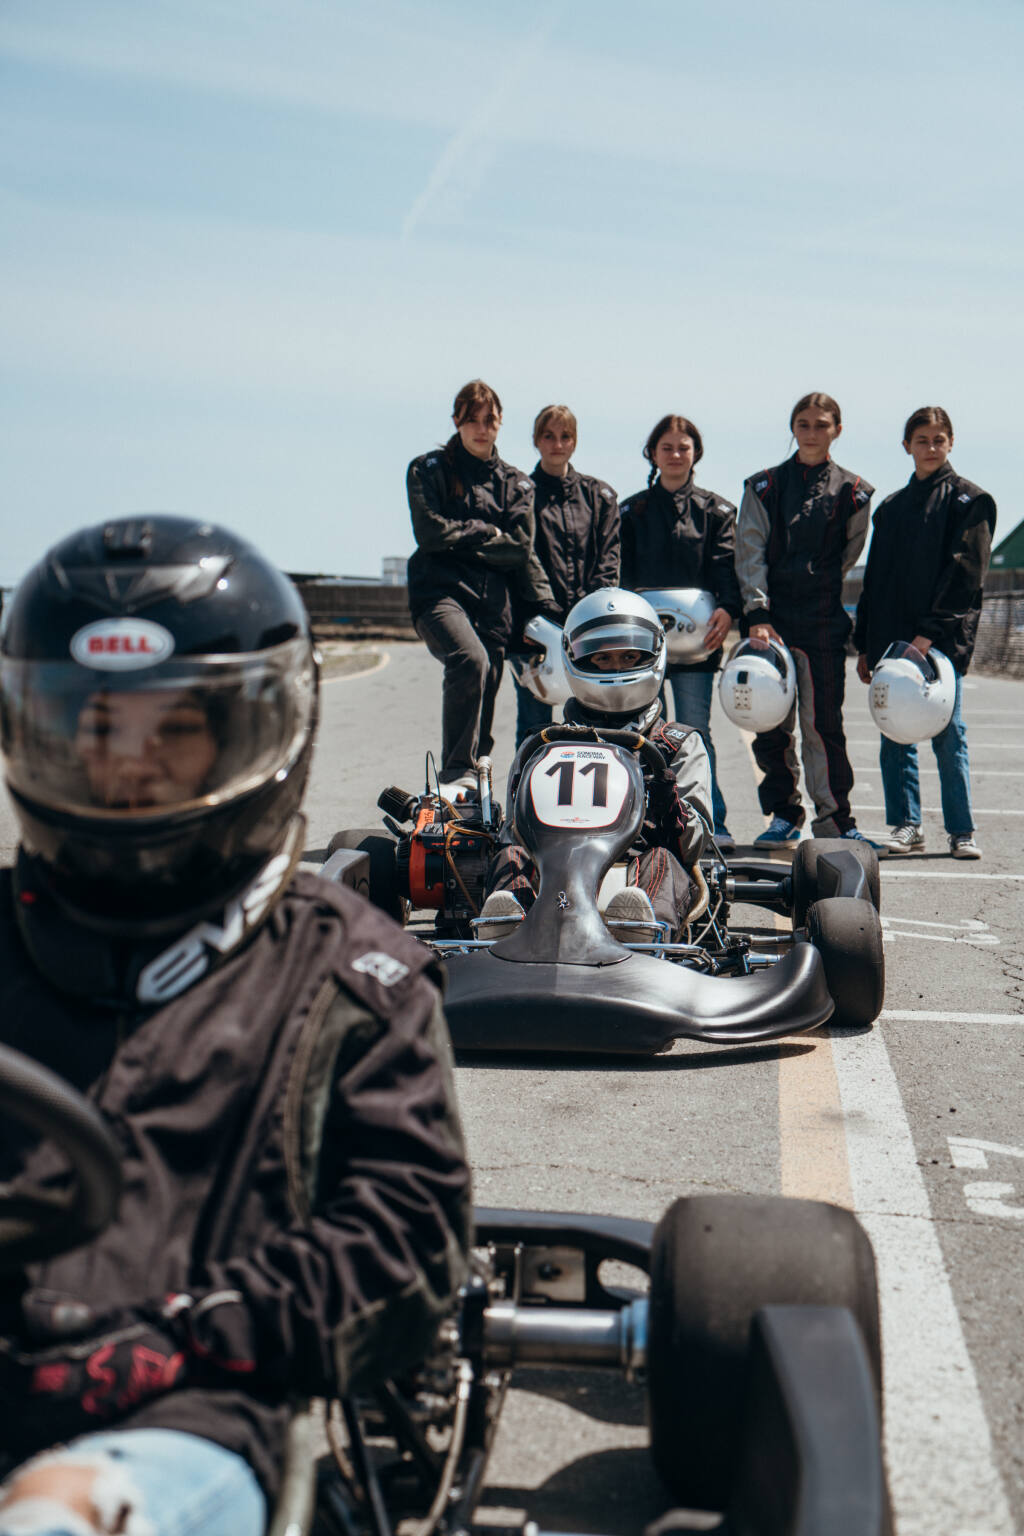 Girls gather on the Sonoma Raceway track as a part of Della Penna Motorsports Next Gen Foundation’s inaugural Sonoma event in April 2022. The foundation’s mission is to get more girl interested in motor sports and give them opportunities to break into the male-dominated industry. (Submitted)